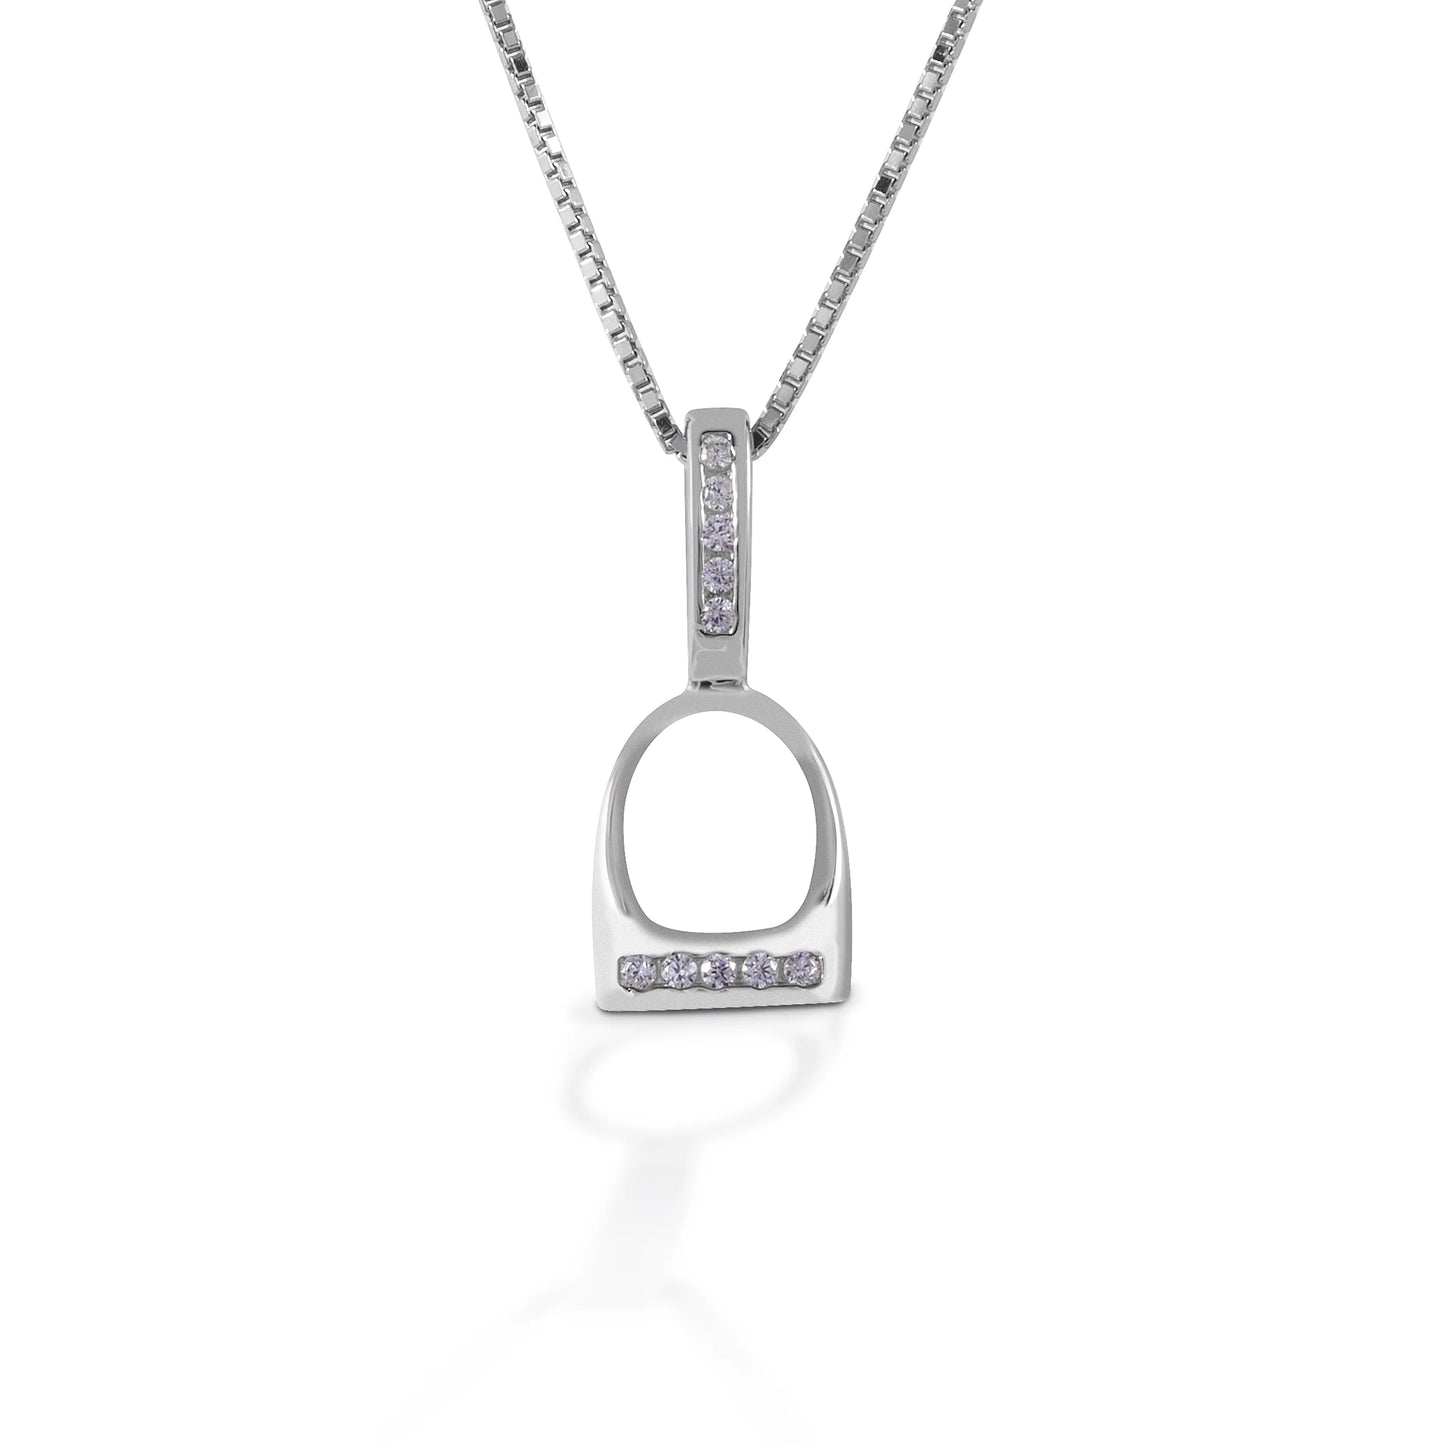 Kelly Herd Necklace English Stirrup Small Sterling Silver